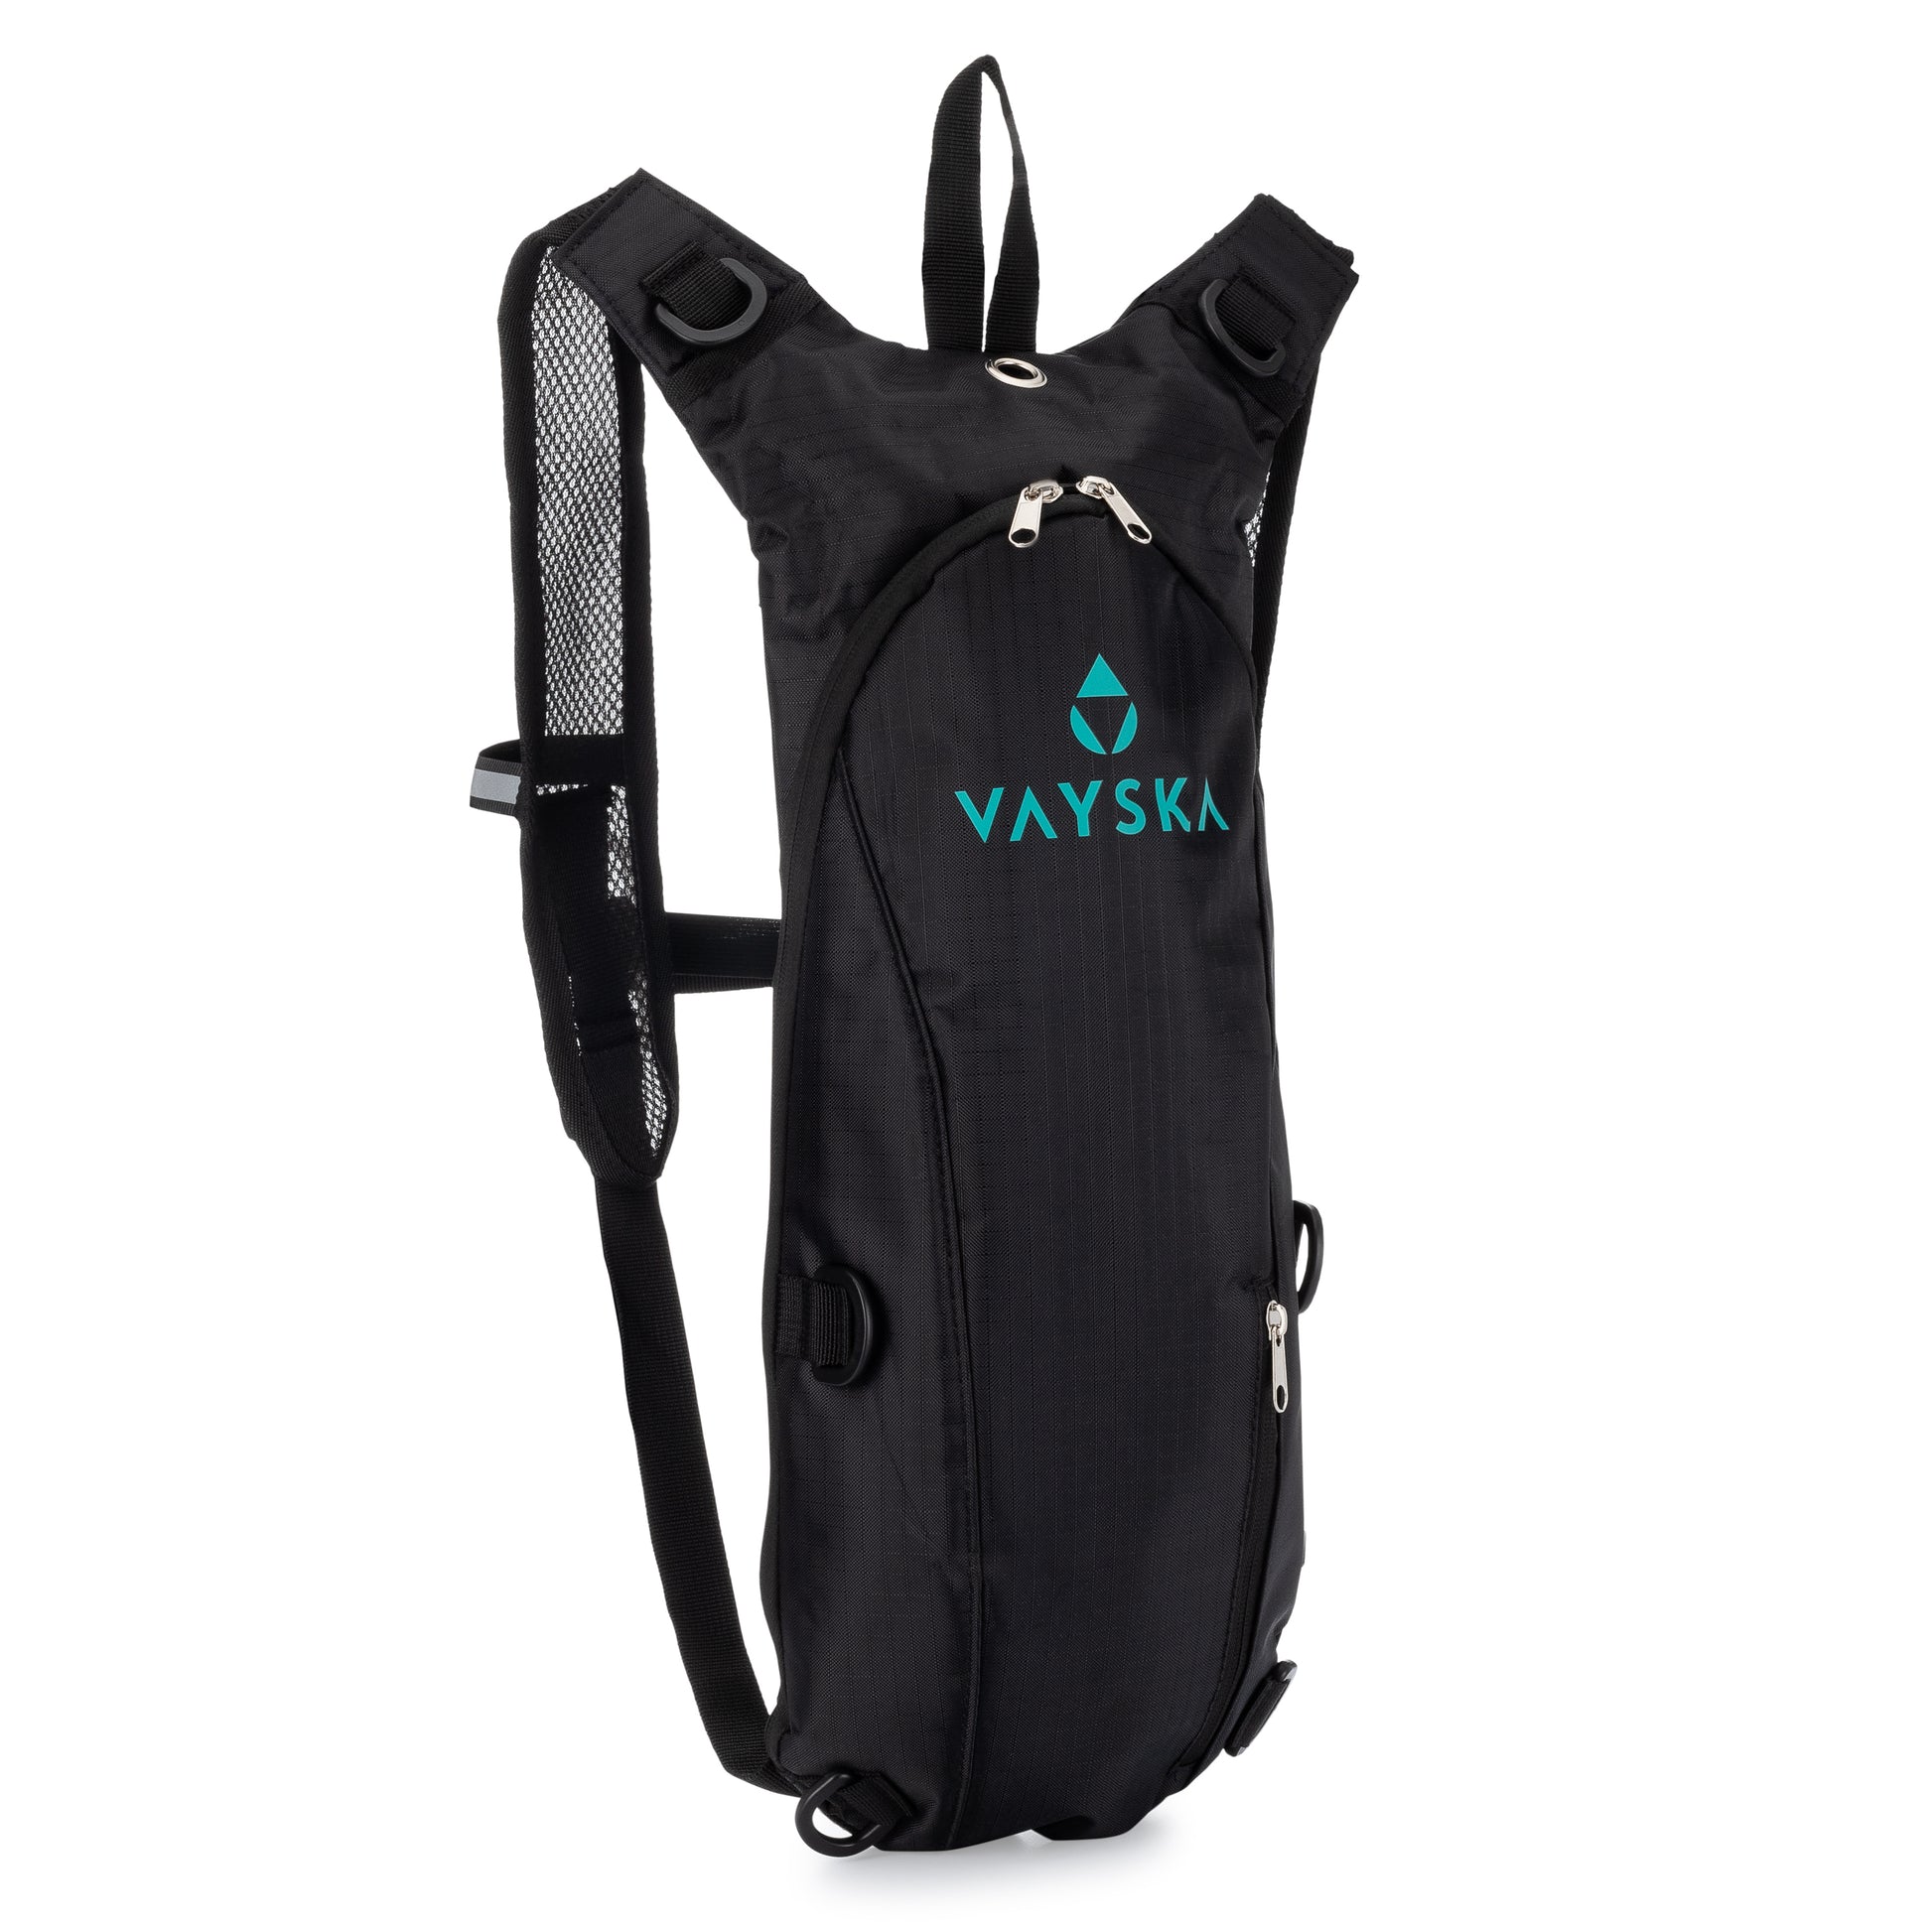 A black Vayska hydration pack with comfort straps on a white background.